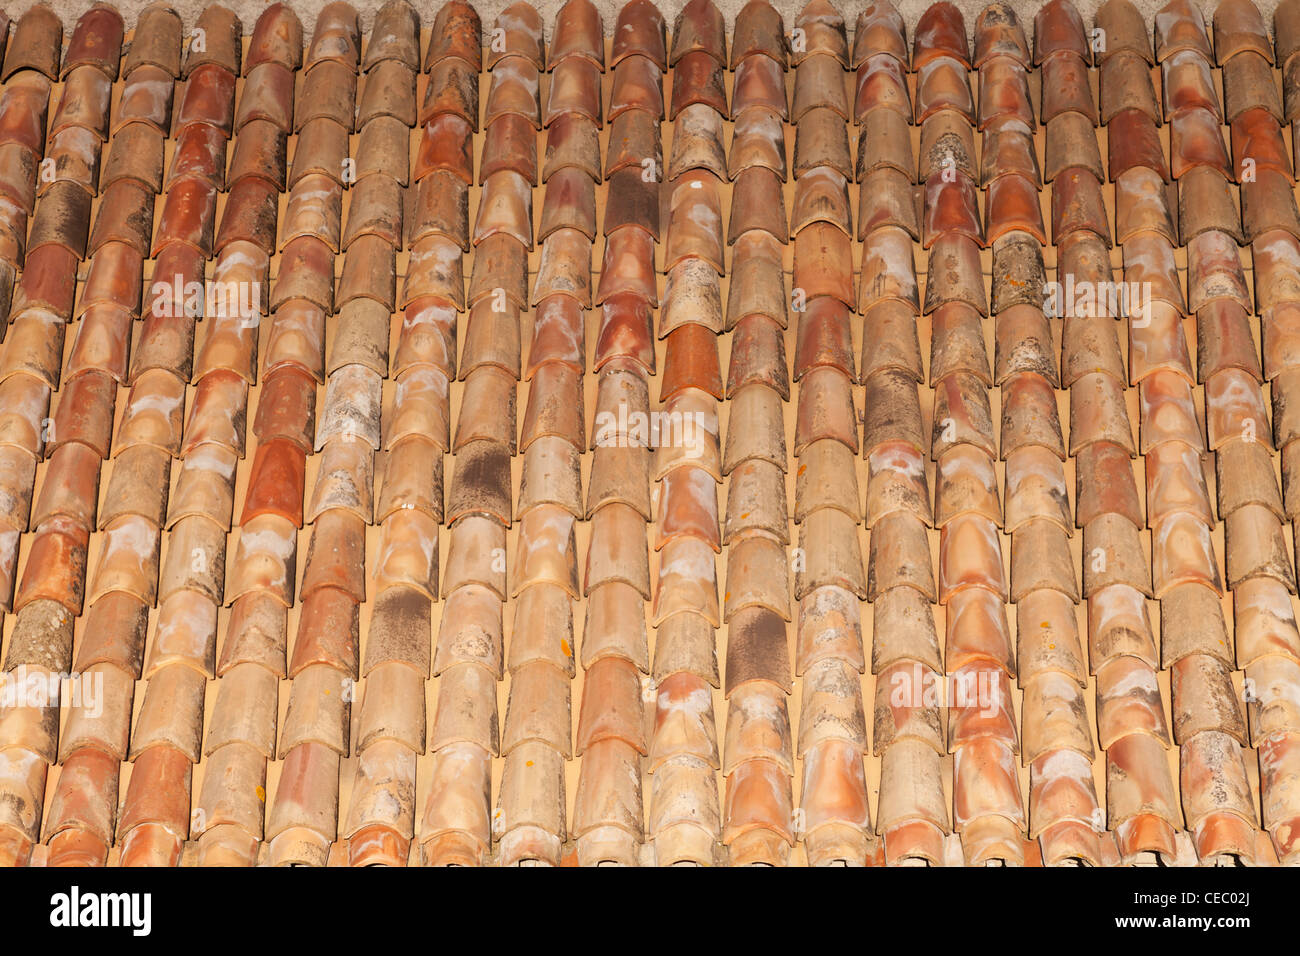 Roof tiles at the medieval port of Aigues-Mortes Languedoc-Roussillon France Stock Photo